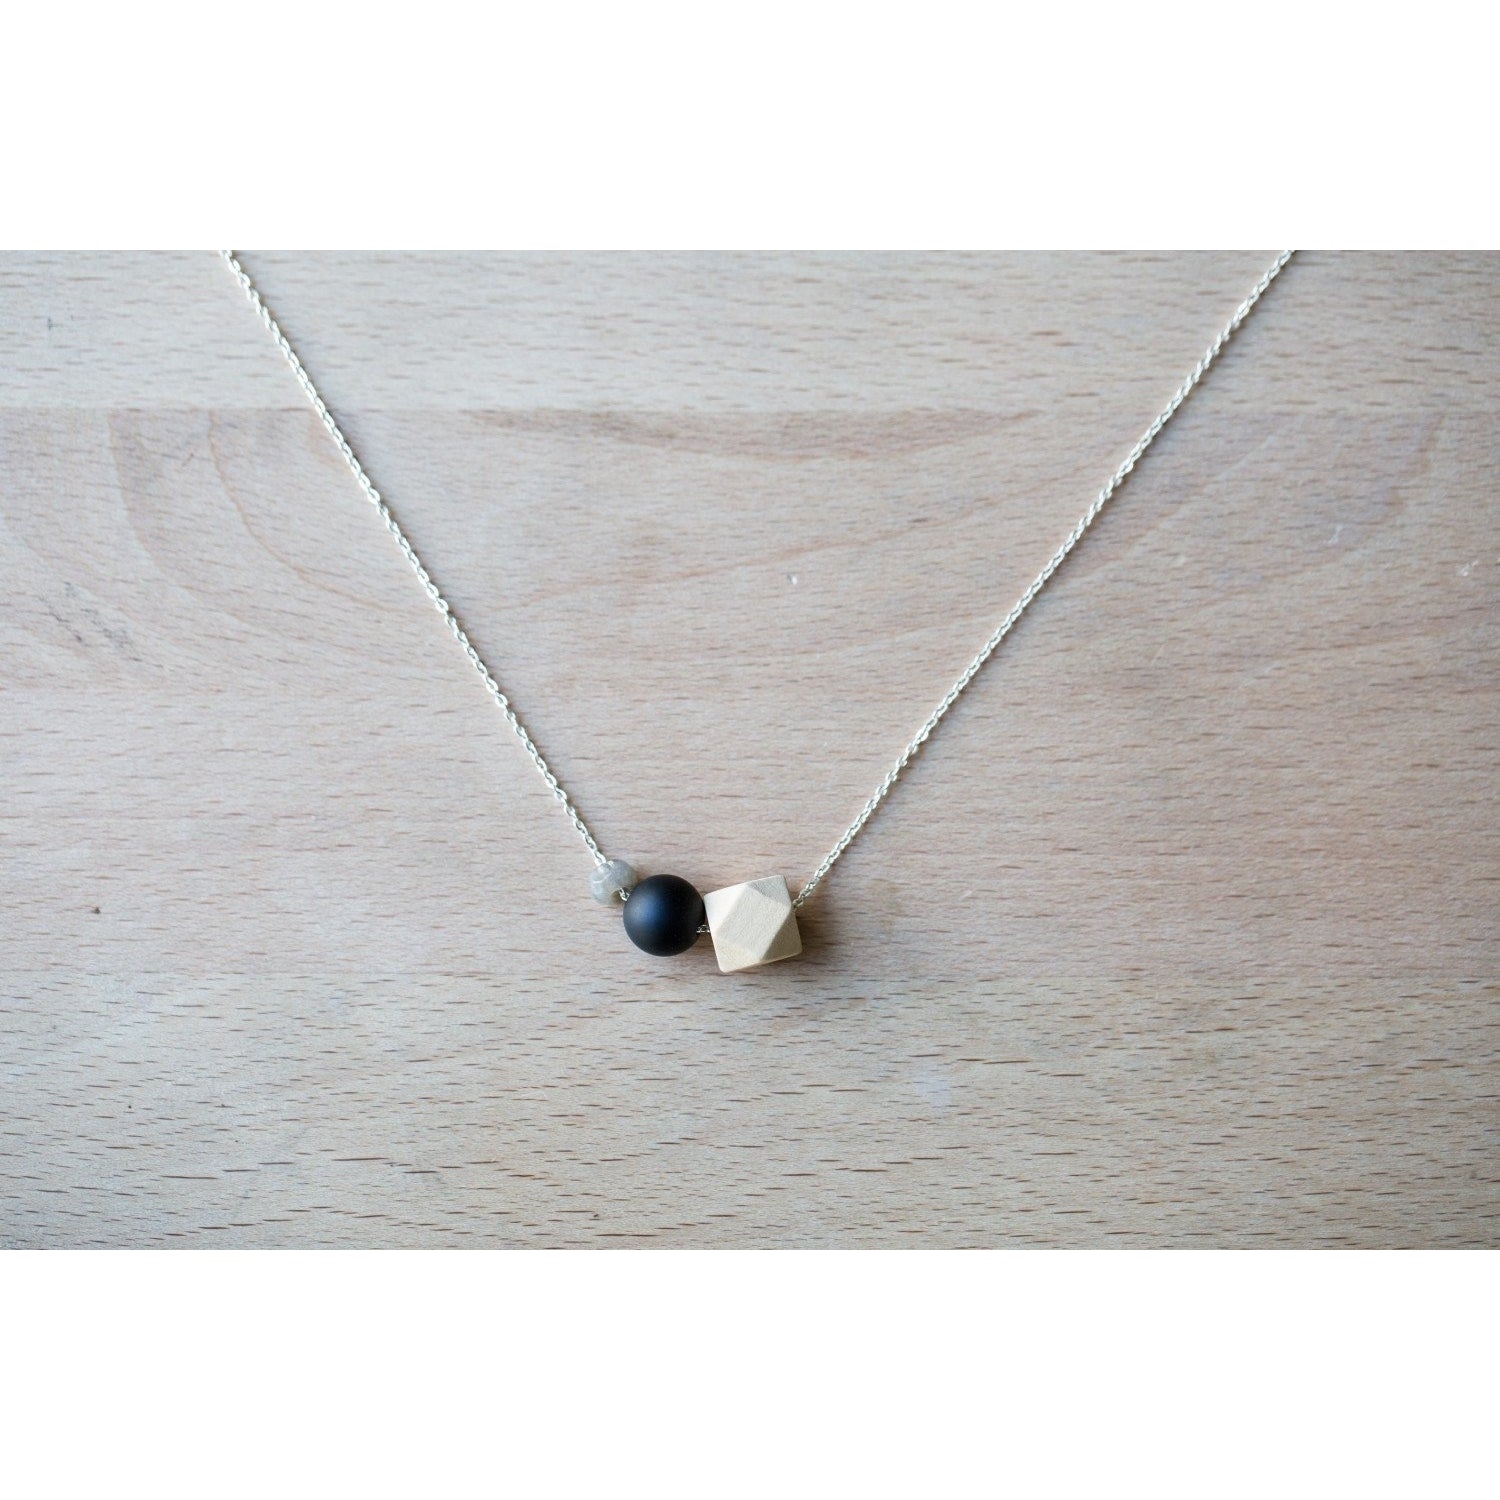 Wood, Black Agate and Gemstone Bead on Silver Chain - Tittup Unique Aromatherapy & Jewellery